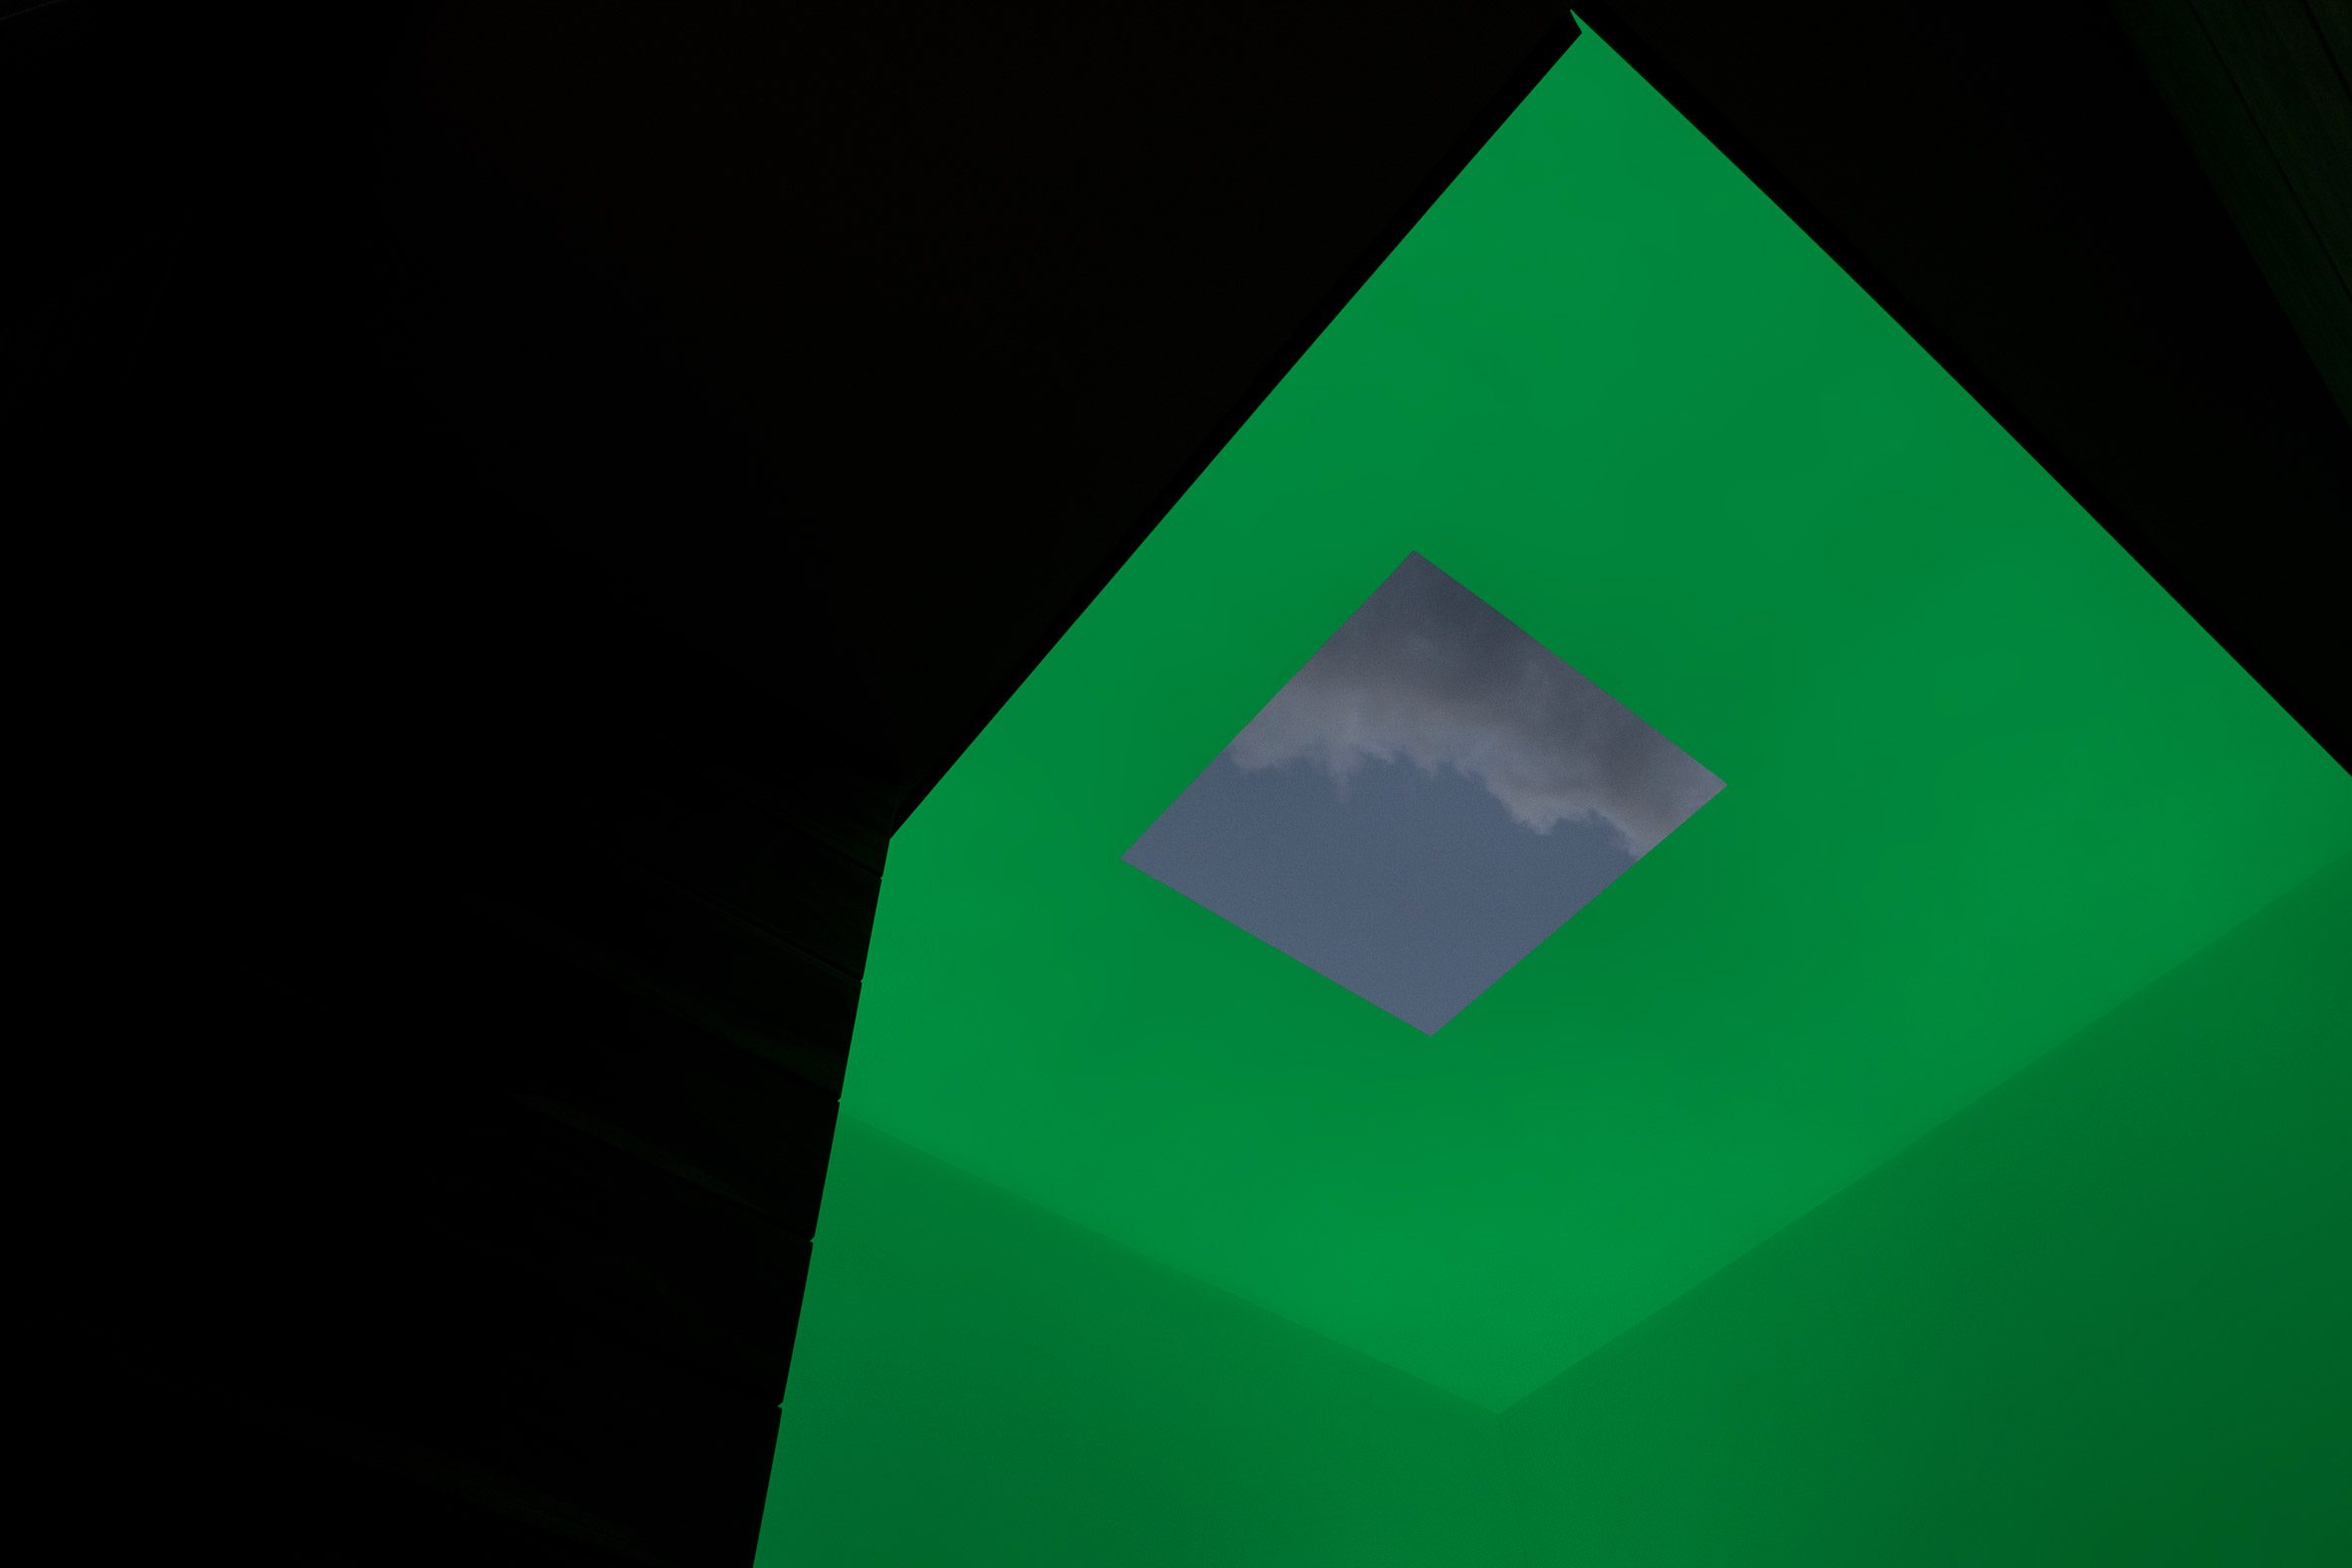 Skylight surrounded by green